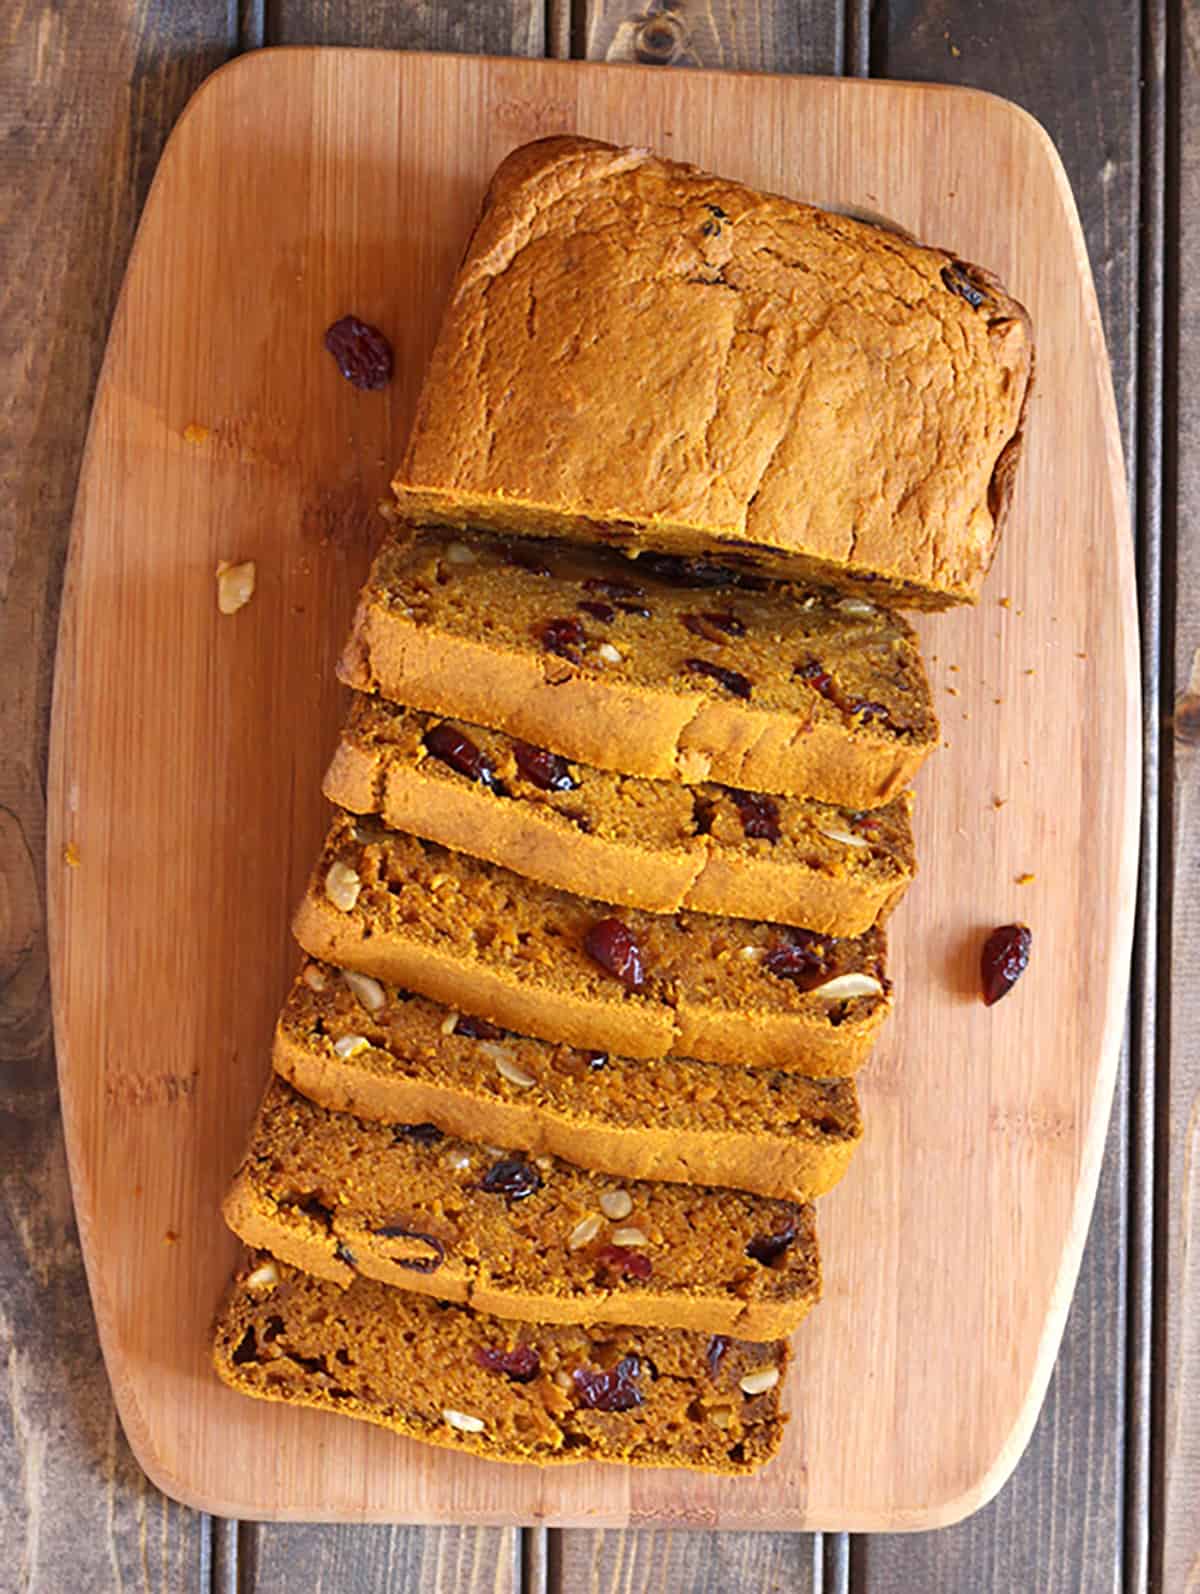 Healthy pumpkin bread recipe with cranberries and nut. Festive fall and holiday bread loaf. 